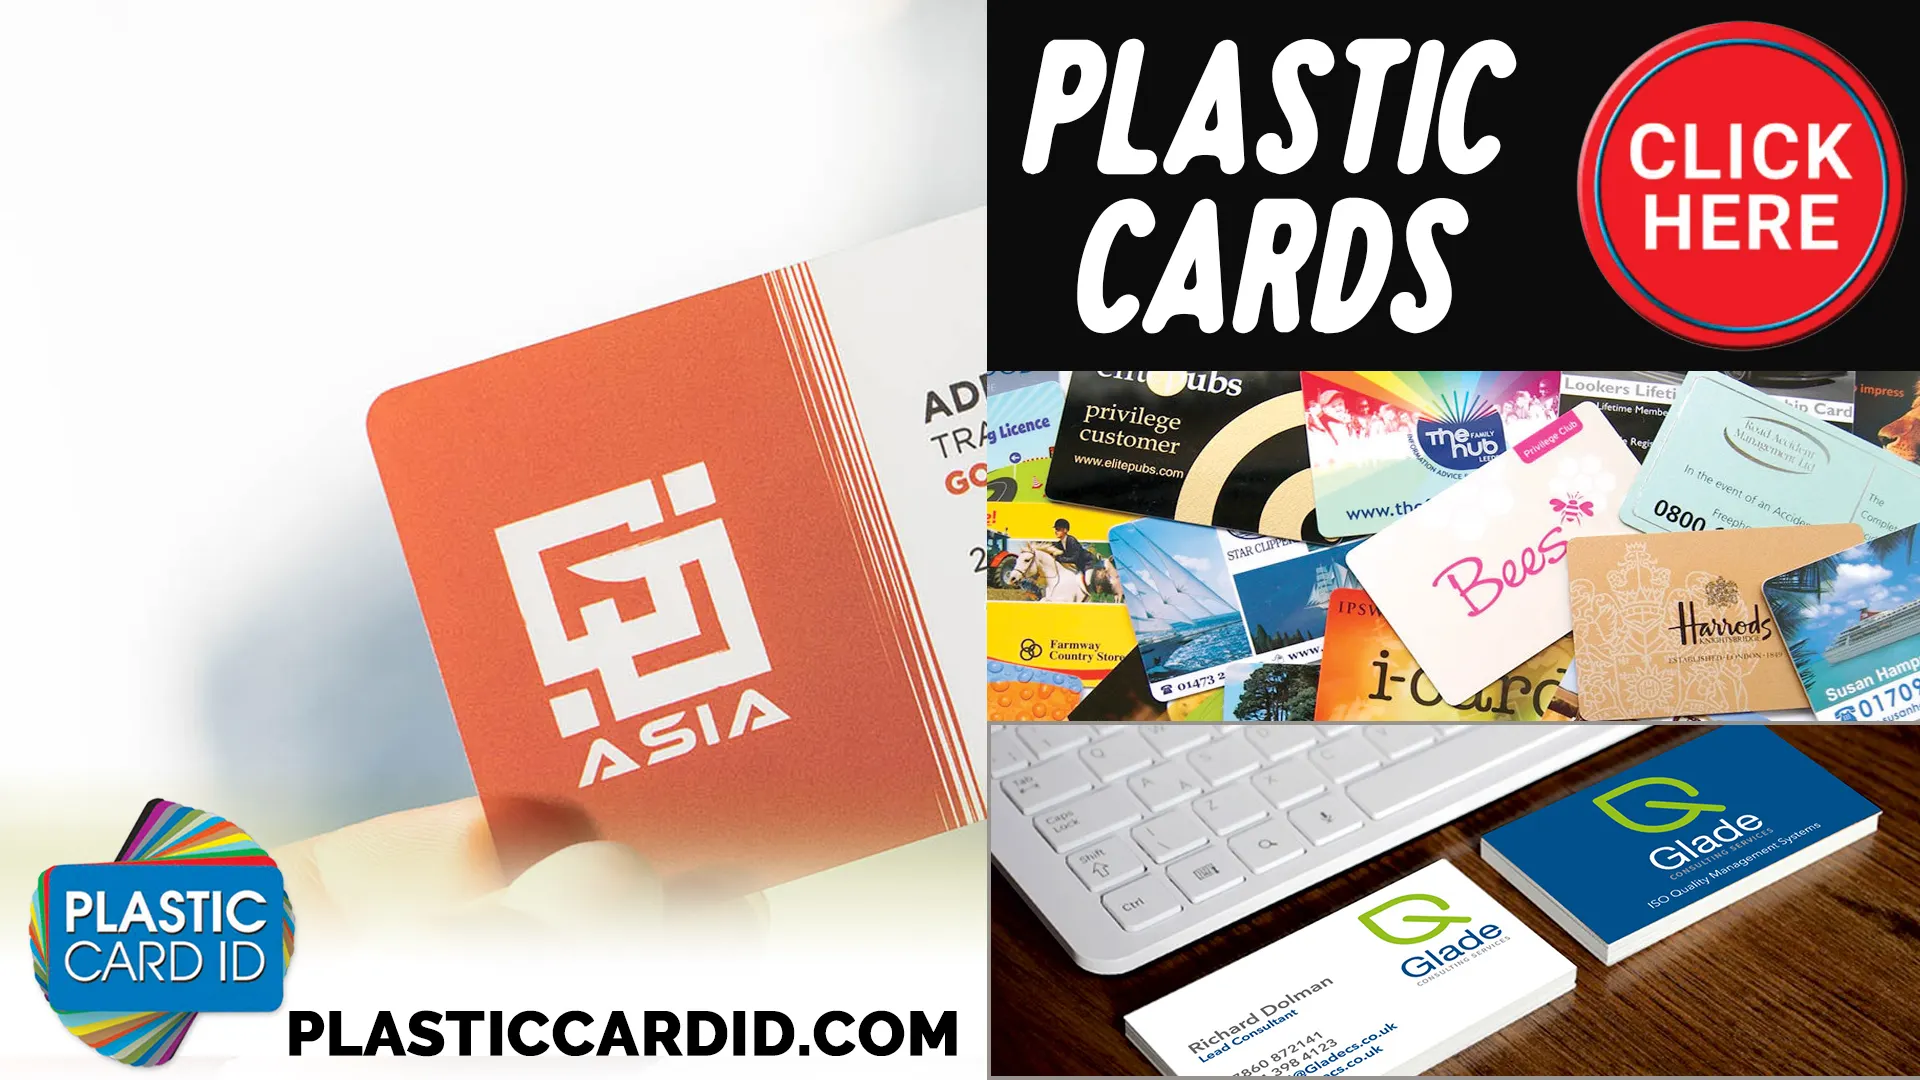 Make Your Event Unforgettable with Custom Plastic Cards